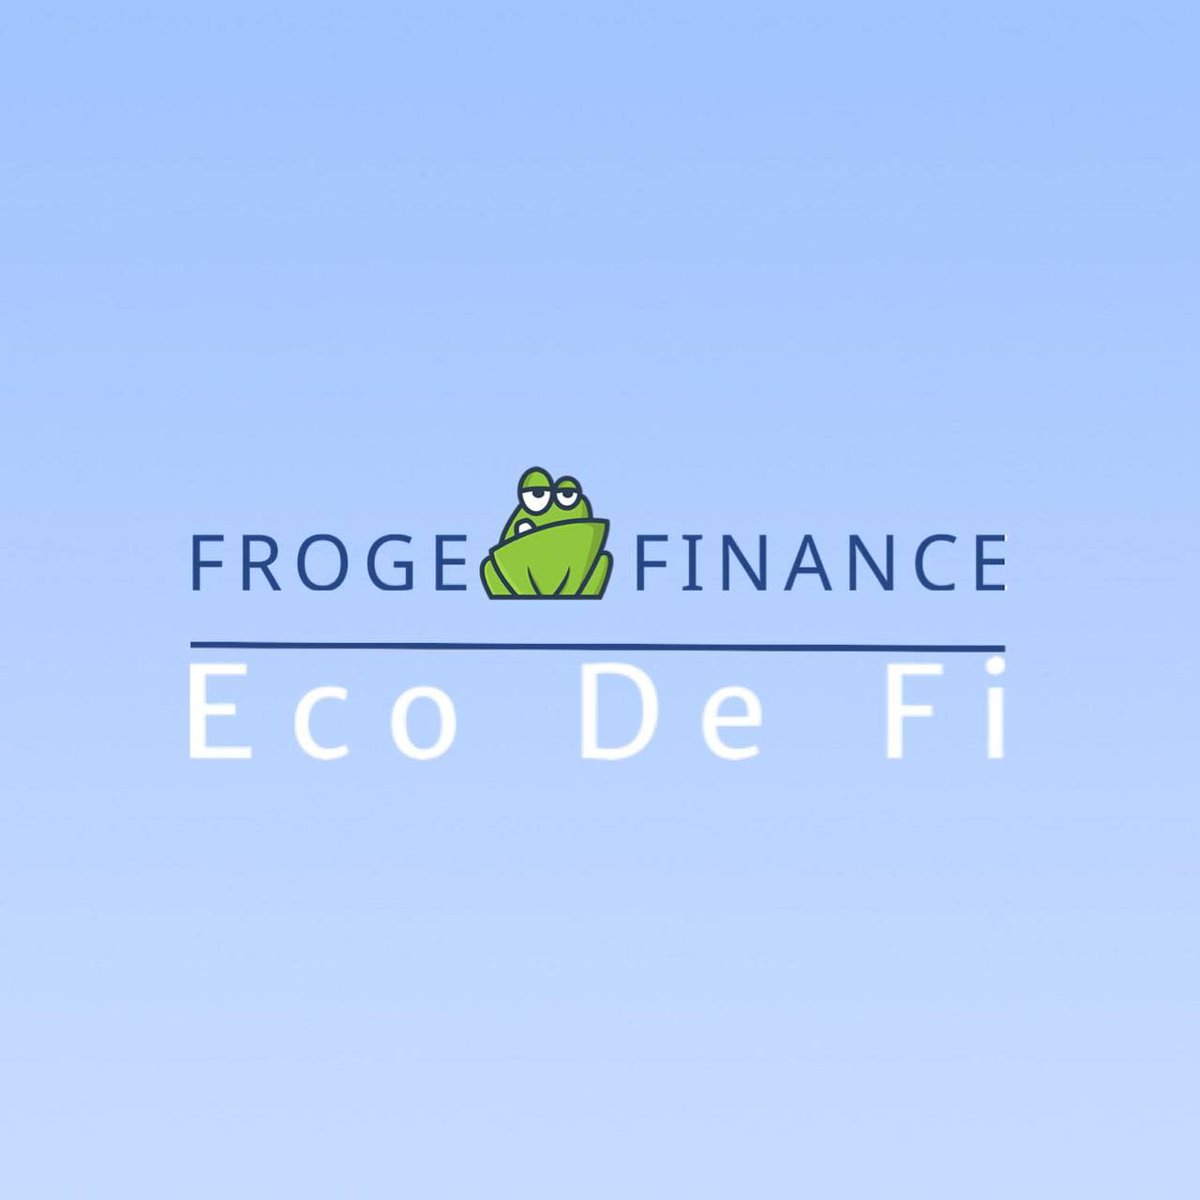 $FROGE    Without a doubt best ECO coin!! NOW AVAILABLE TO BUY ON BSC  PANCAKE SWAP   
  Froge.finance  #ClimateAction  #savetherainforests #ecodefi #EarthDay2021   $shib $feg $doge $akita #BSC #BinanceSmartChain #BNB #Binance #BSCGems #cryptocurrencies